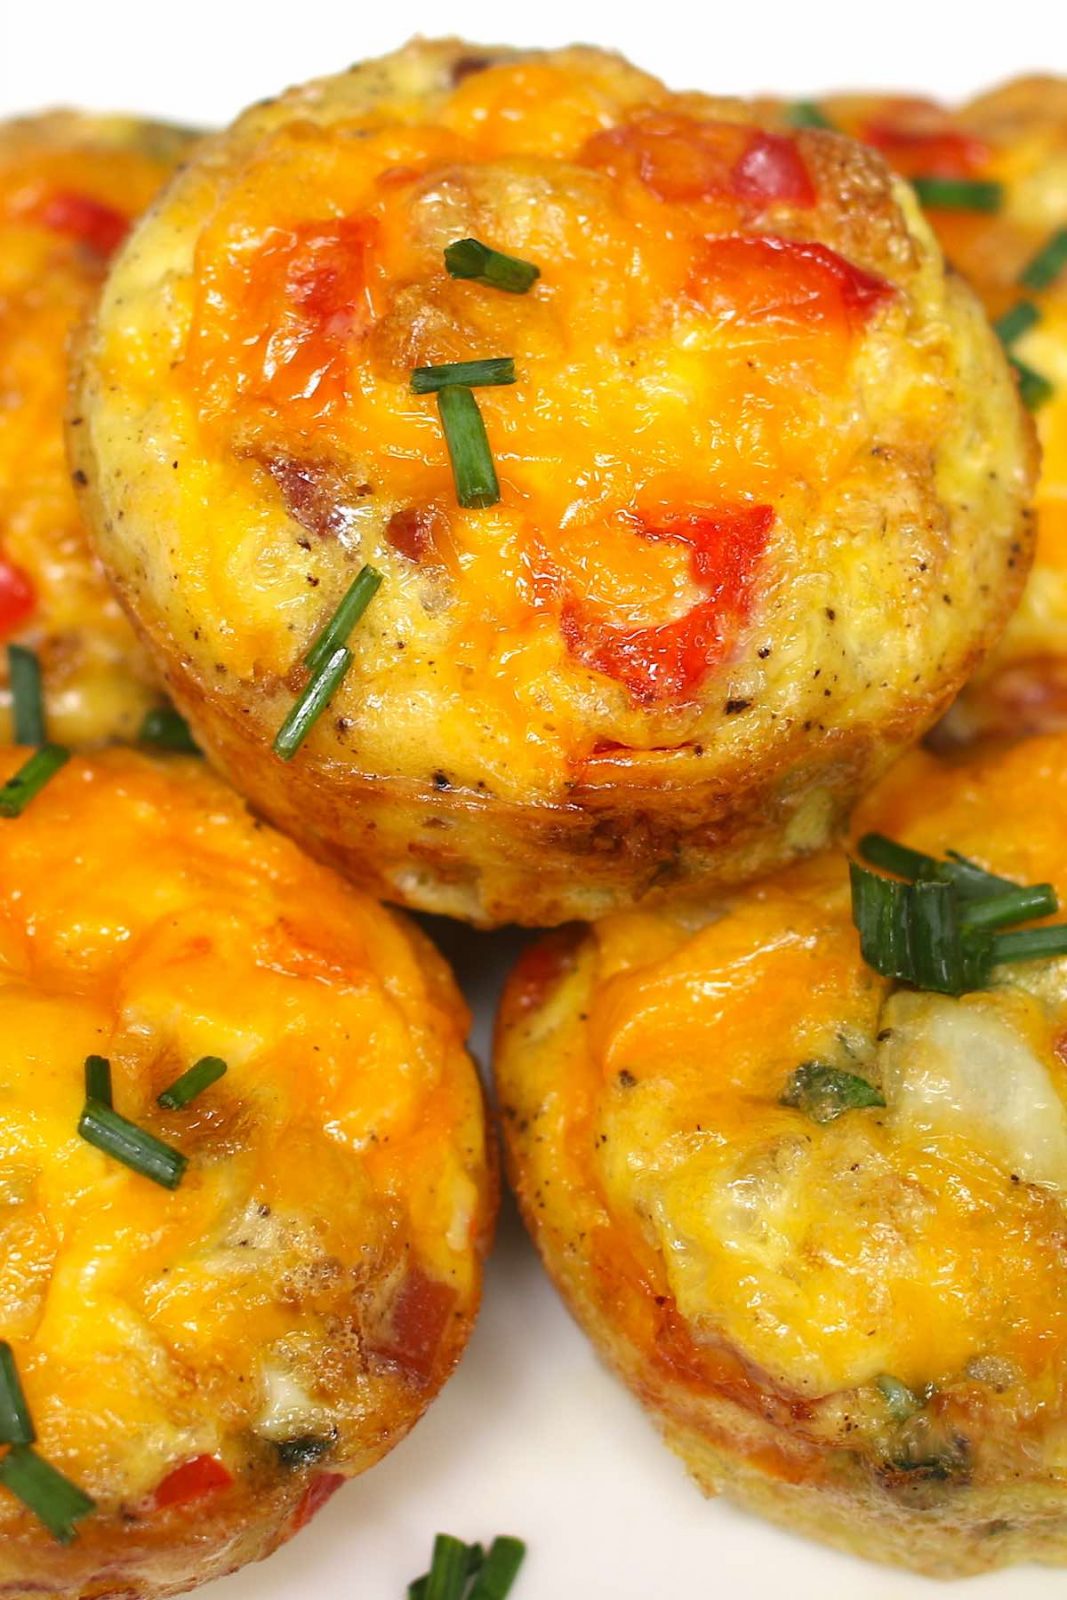 Potluck Breakfast Egg Muffins are an easy make-ahead recipe that takes a few minutes to throw together. These breakfast muffins are delicious, healthy and nutritious, perfect for busy mornings!